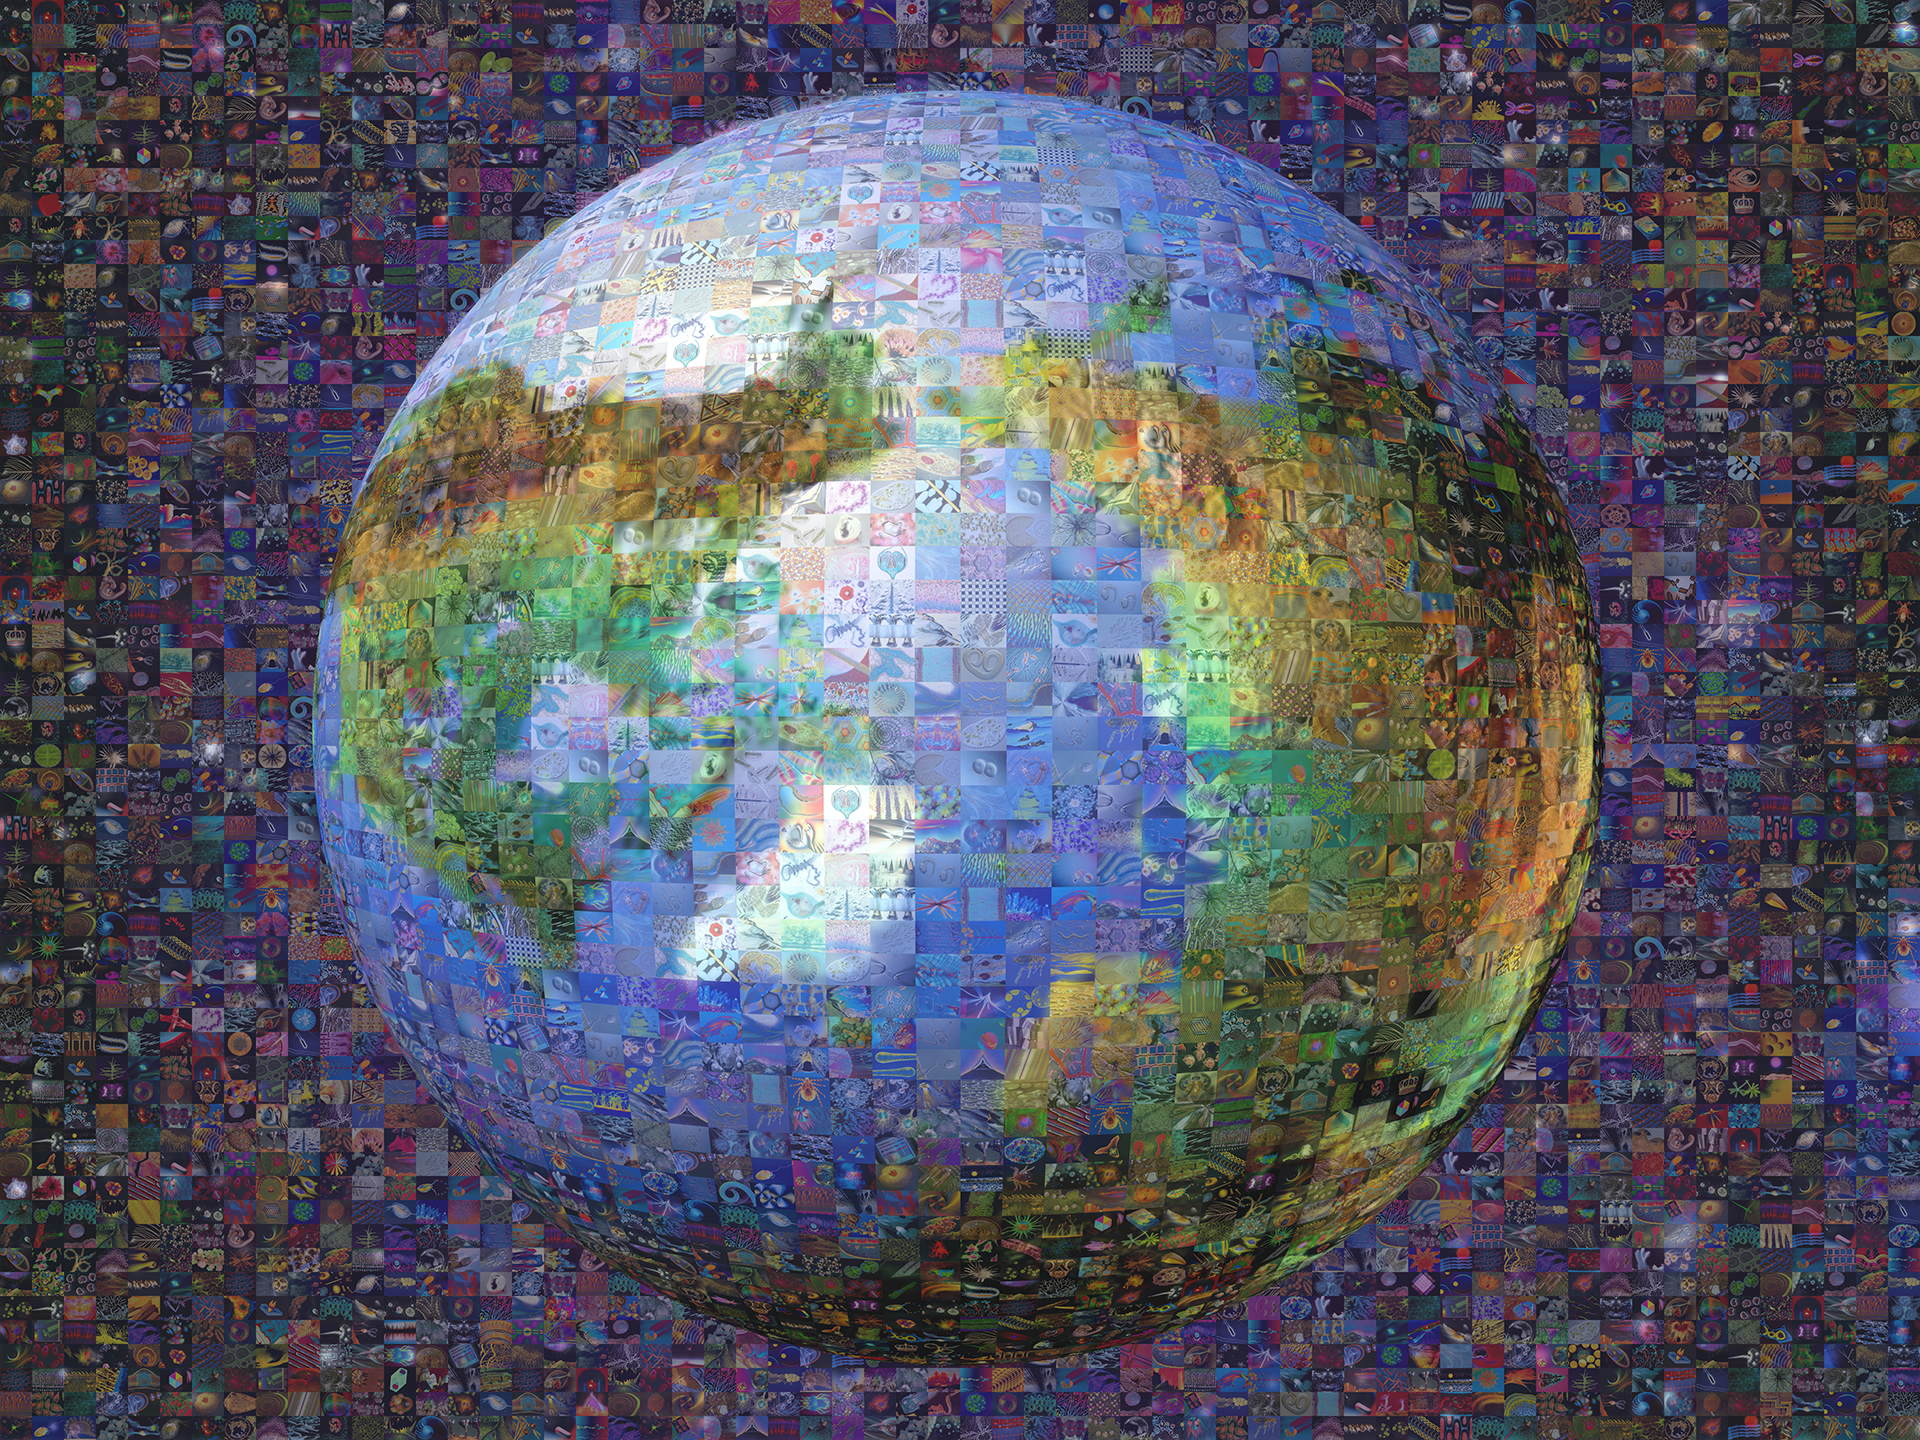 photo mosaic 3D Earth mosaic (looking down at the top of the Earth) created using 583 photos of microorganisms